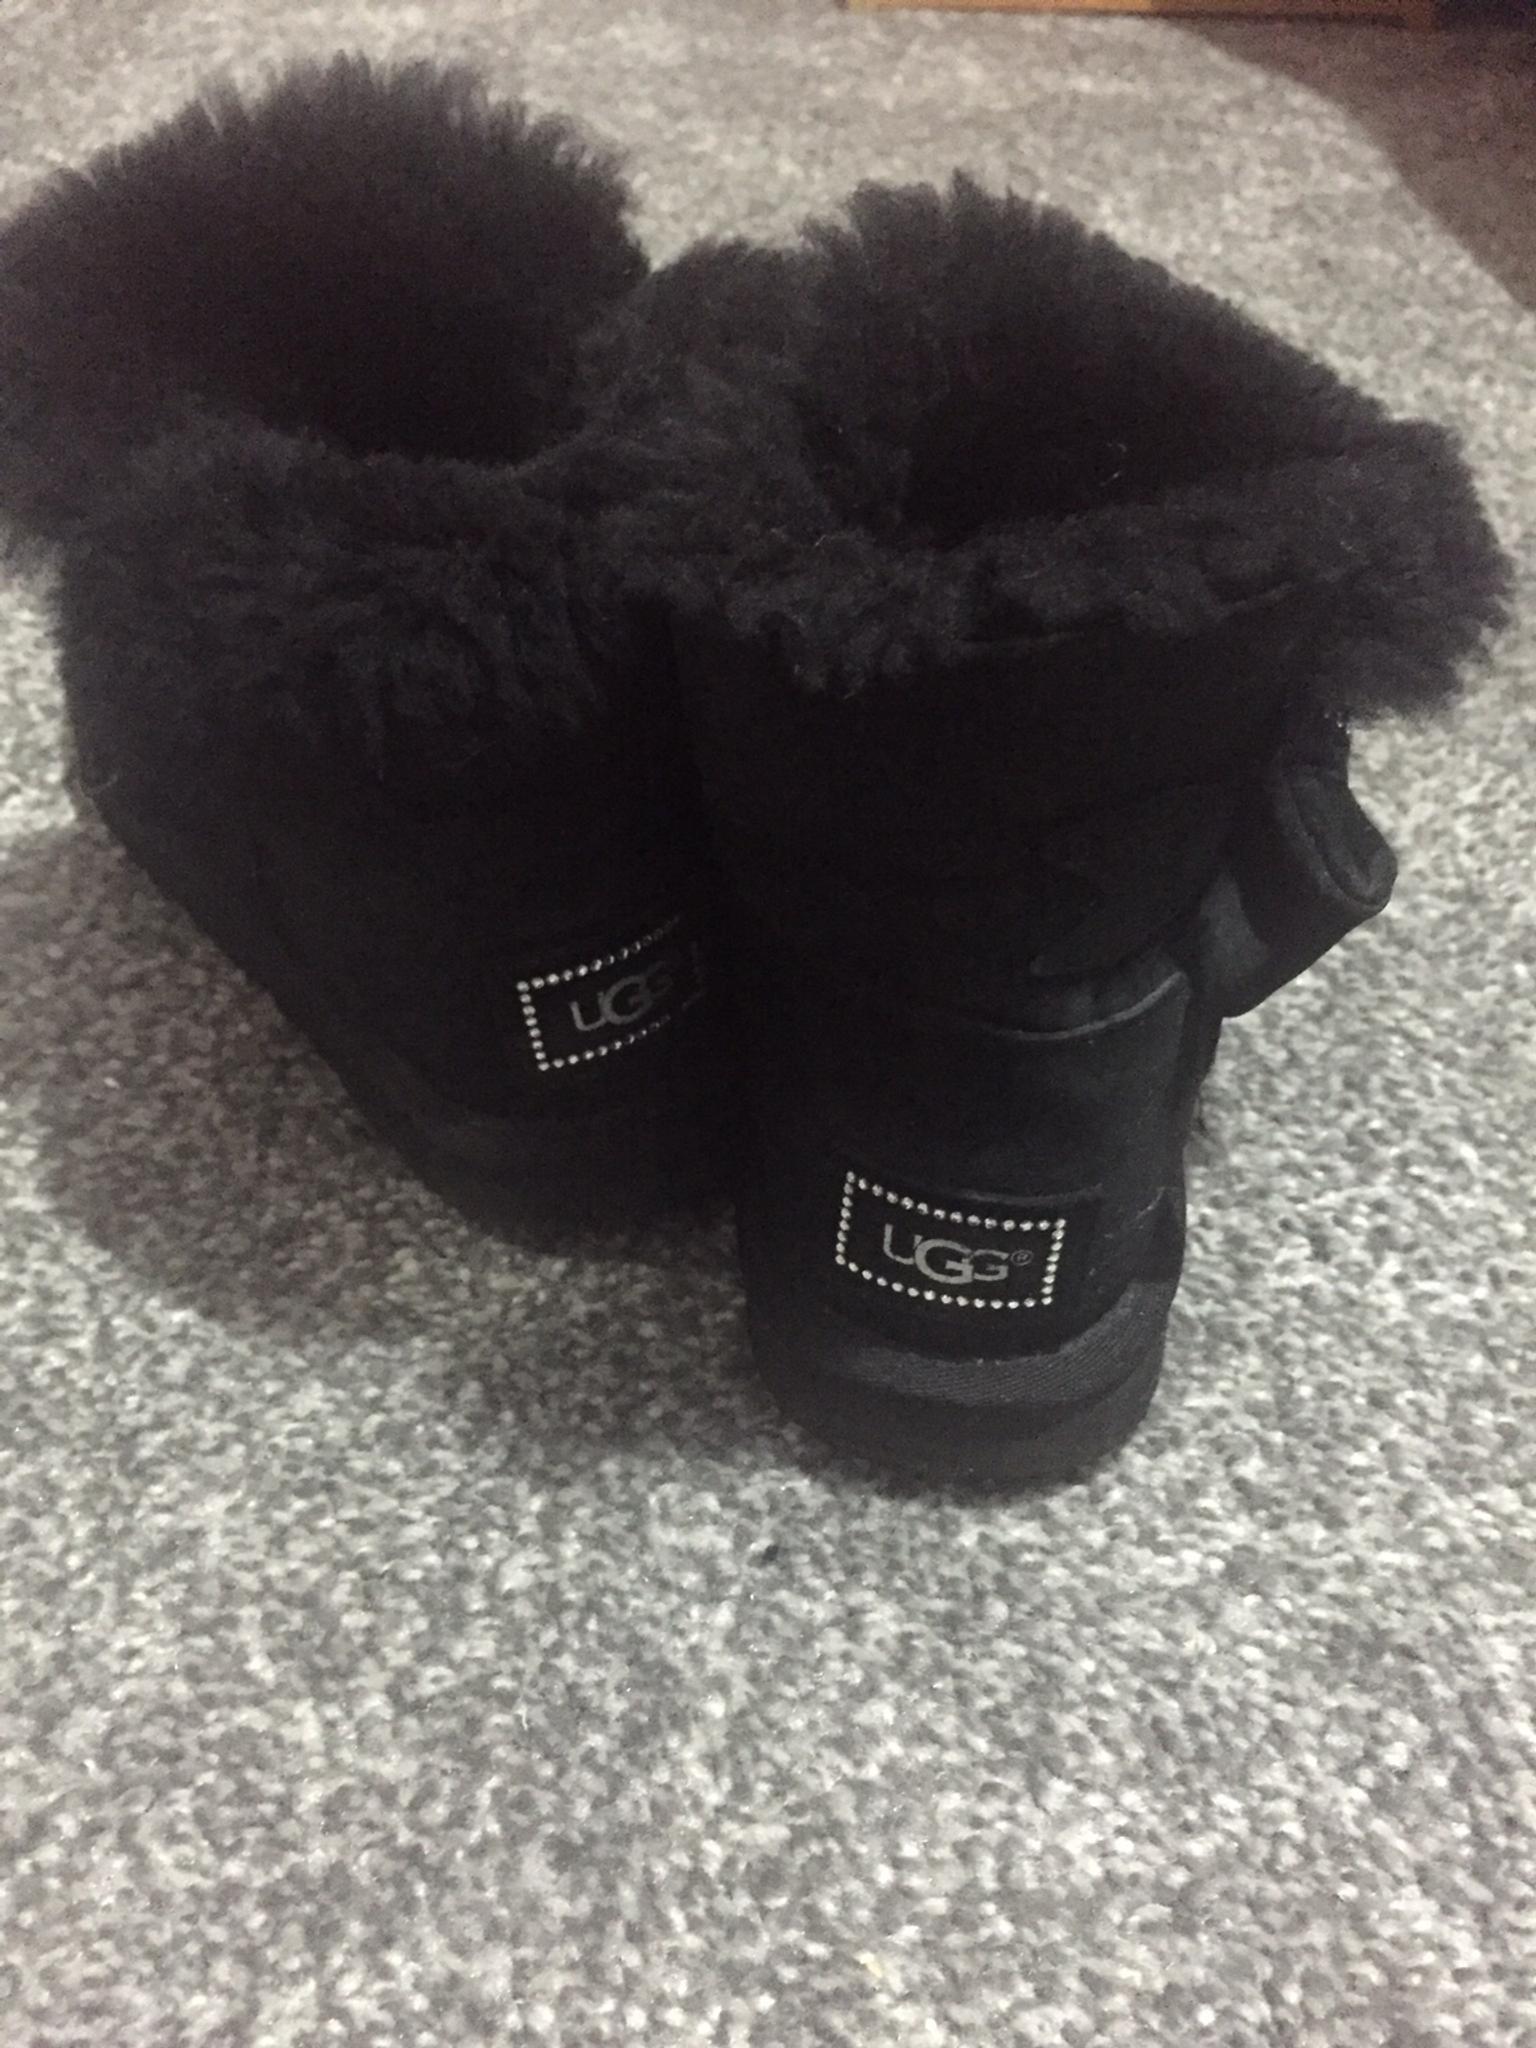 office ugg boots sale